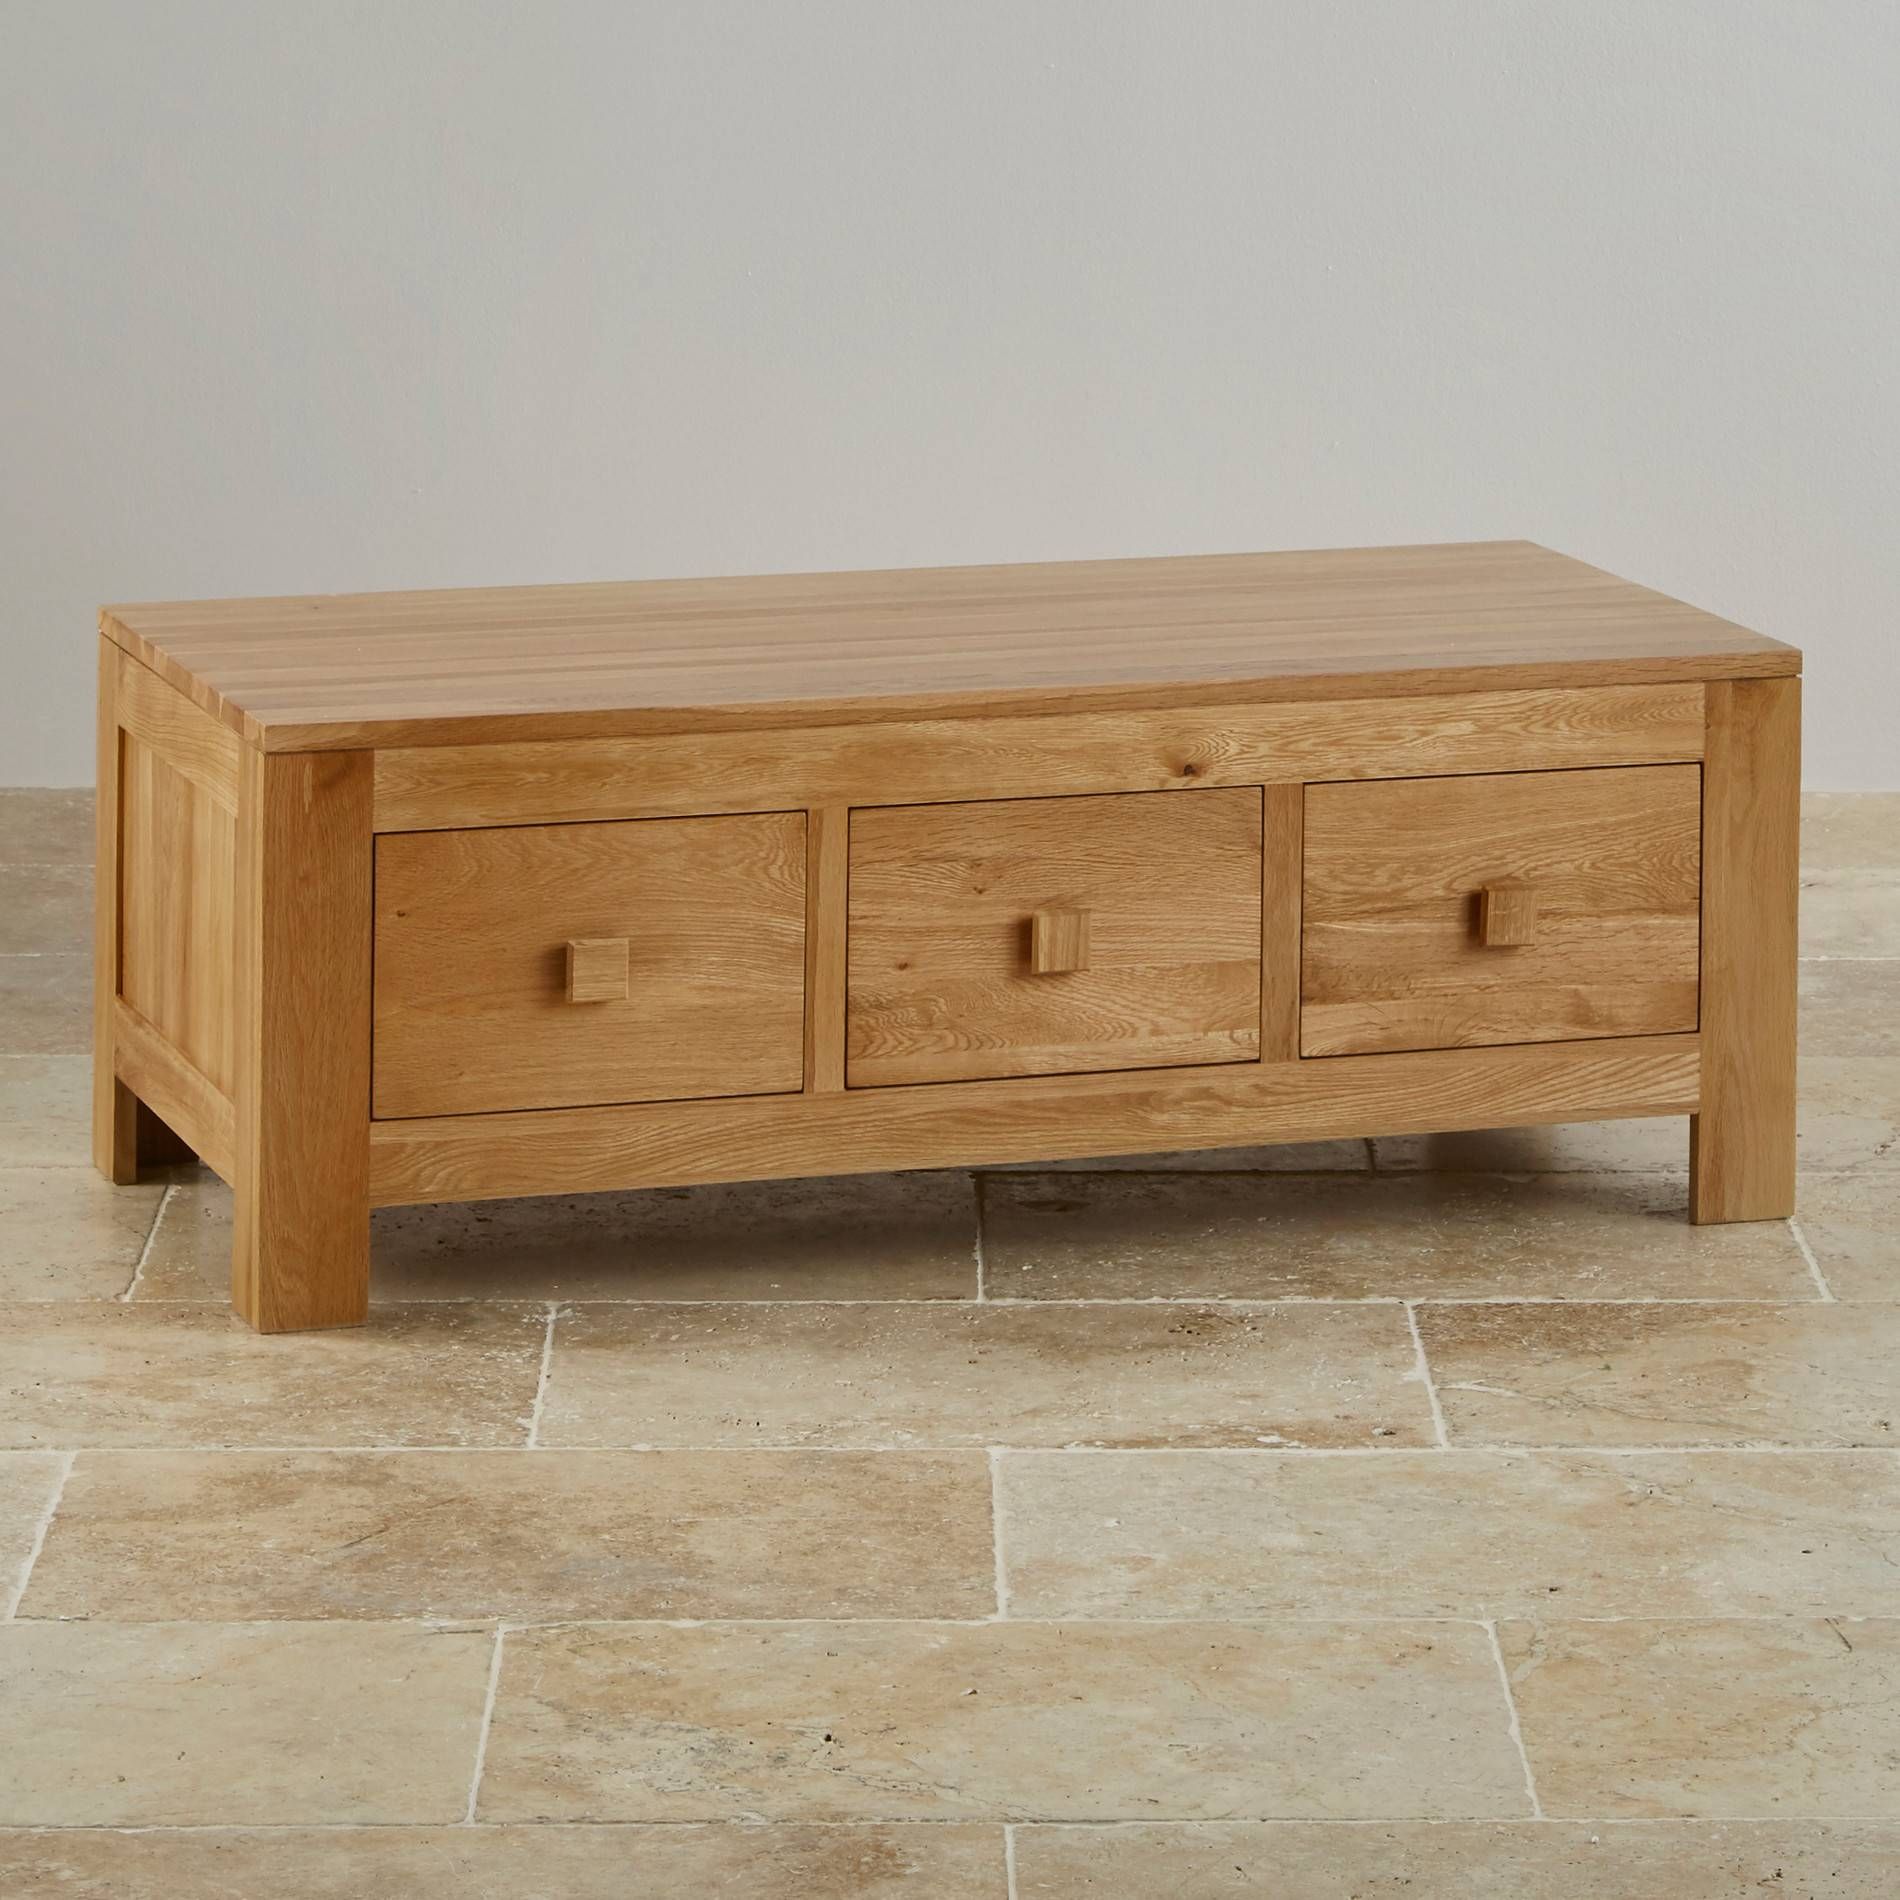 Oakdale 6 Drawer Coffee Table In Natural Solid Oak Regarding Oak Coffee Tables With Storage (View 2 of 15)